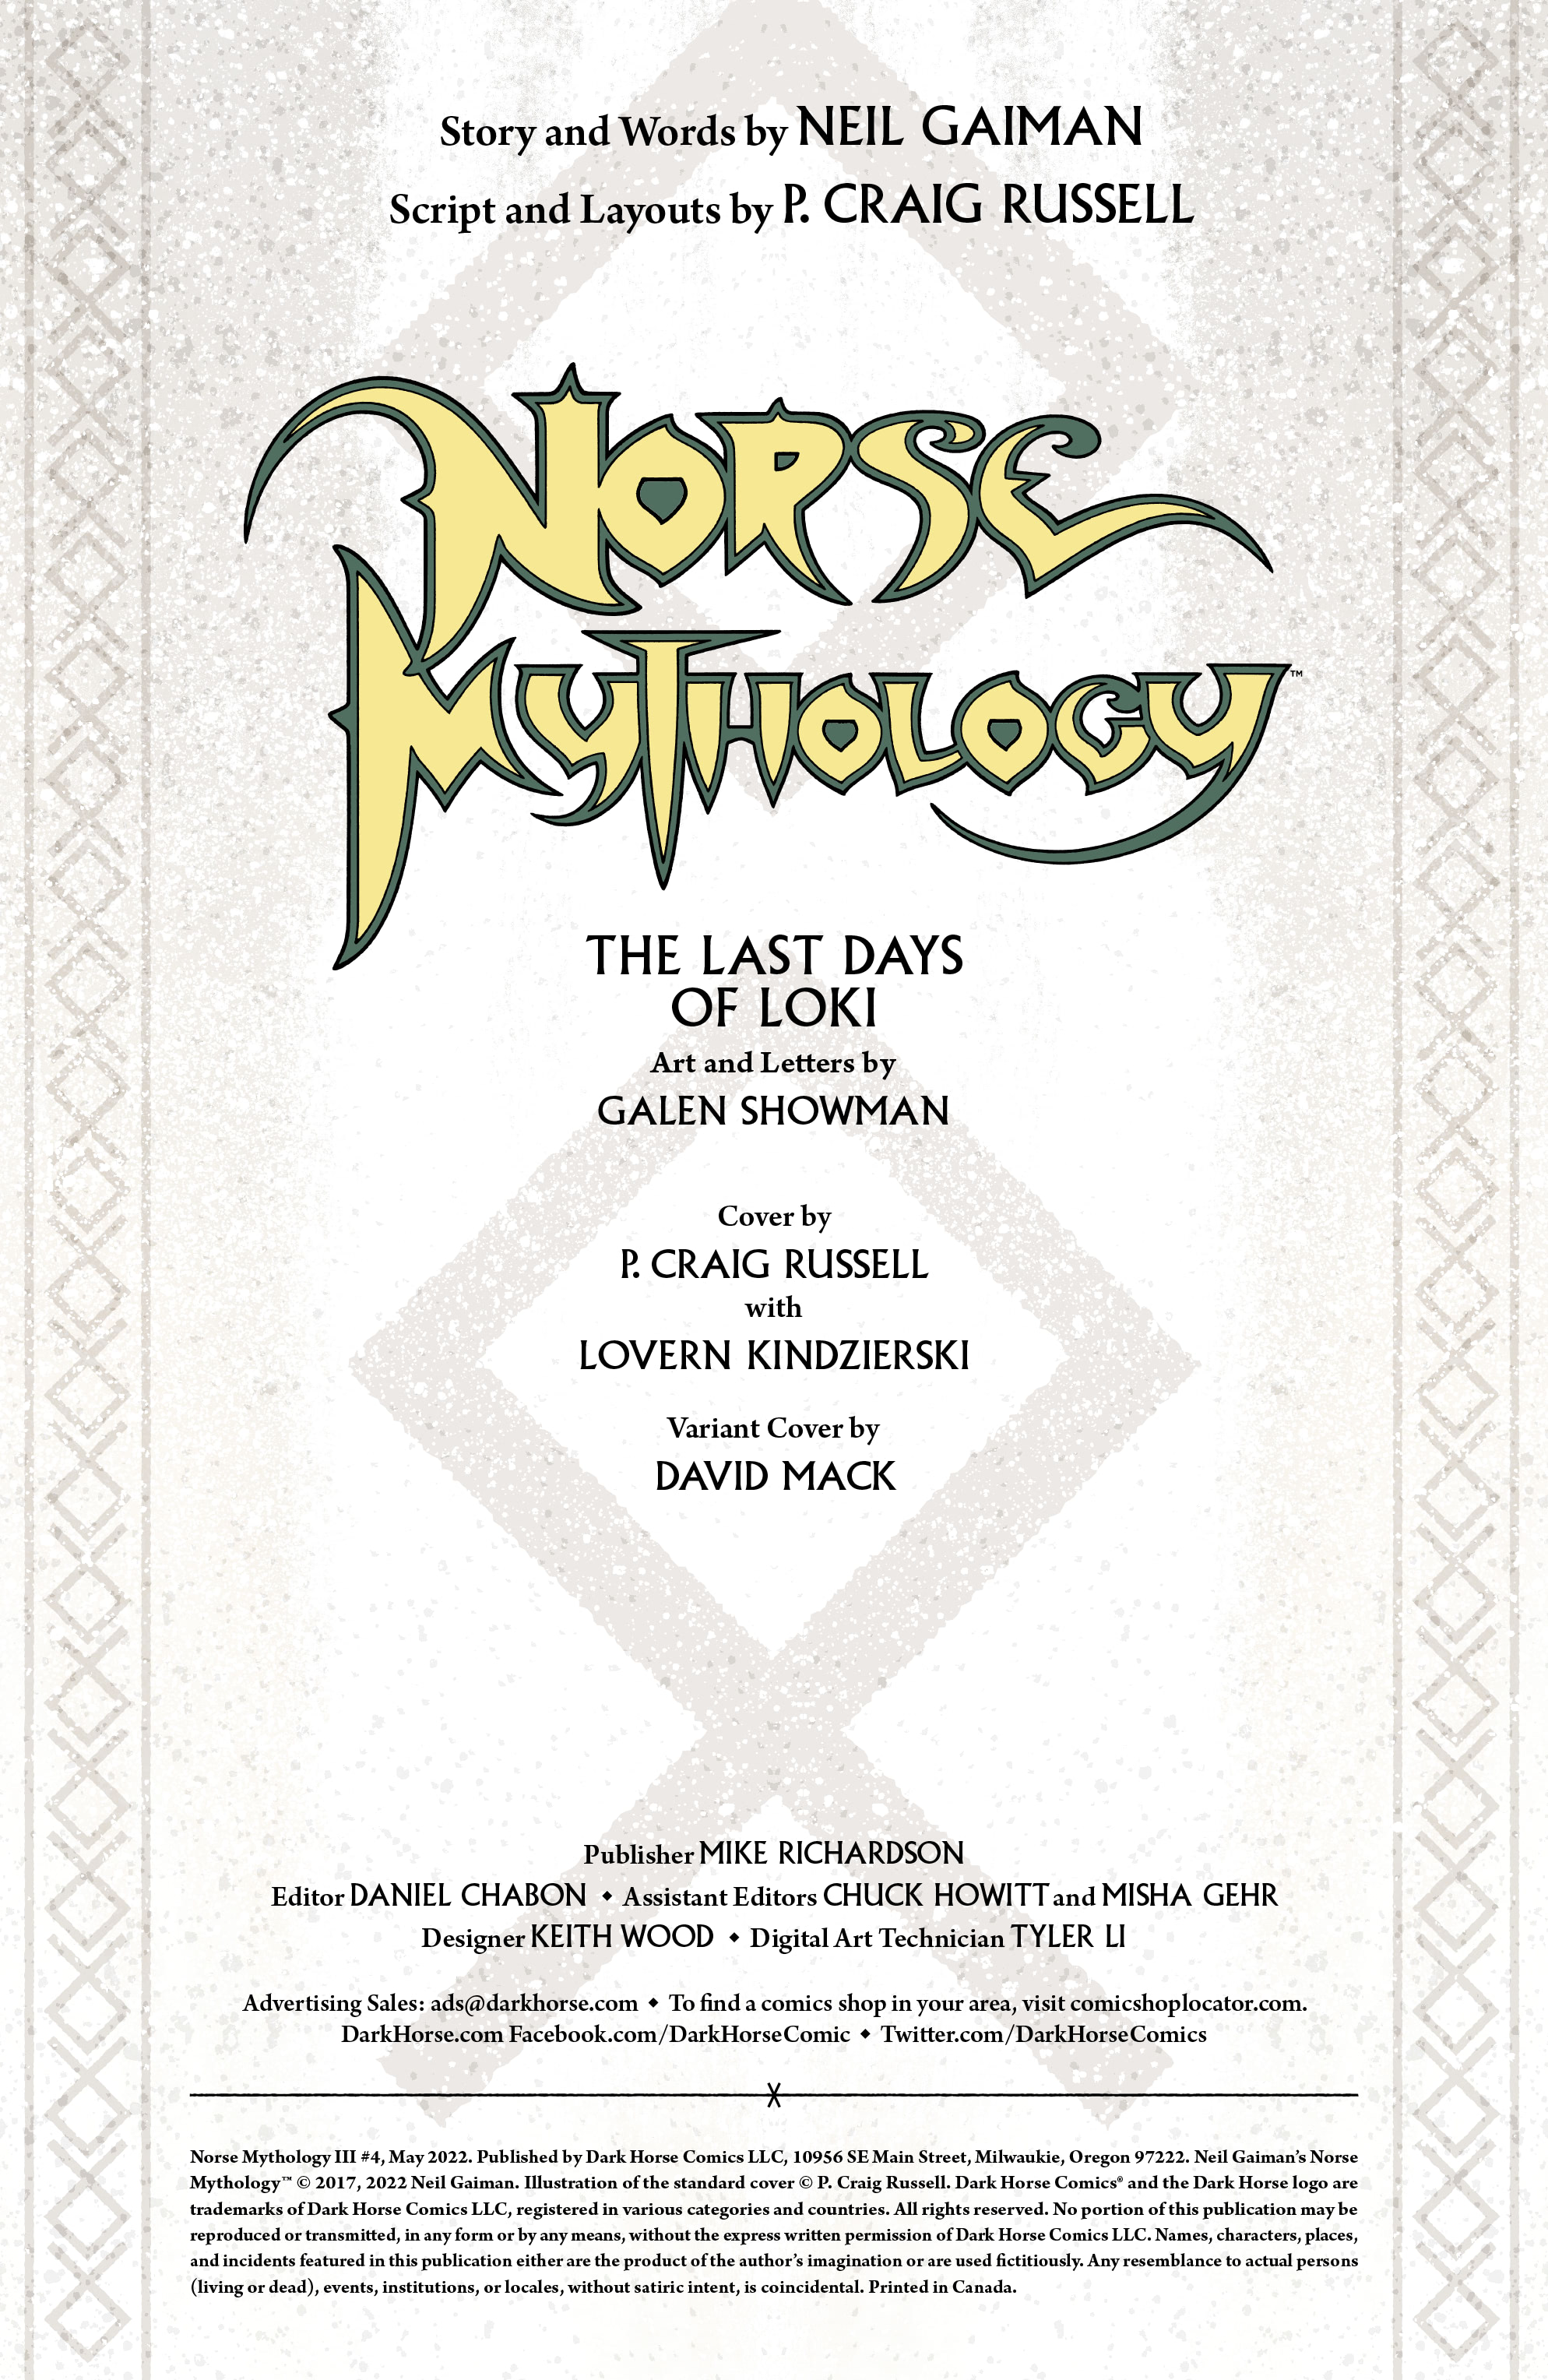 Read online Norse Mythology III comic -  Issue #4 - 2